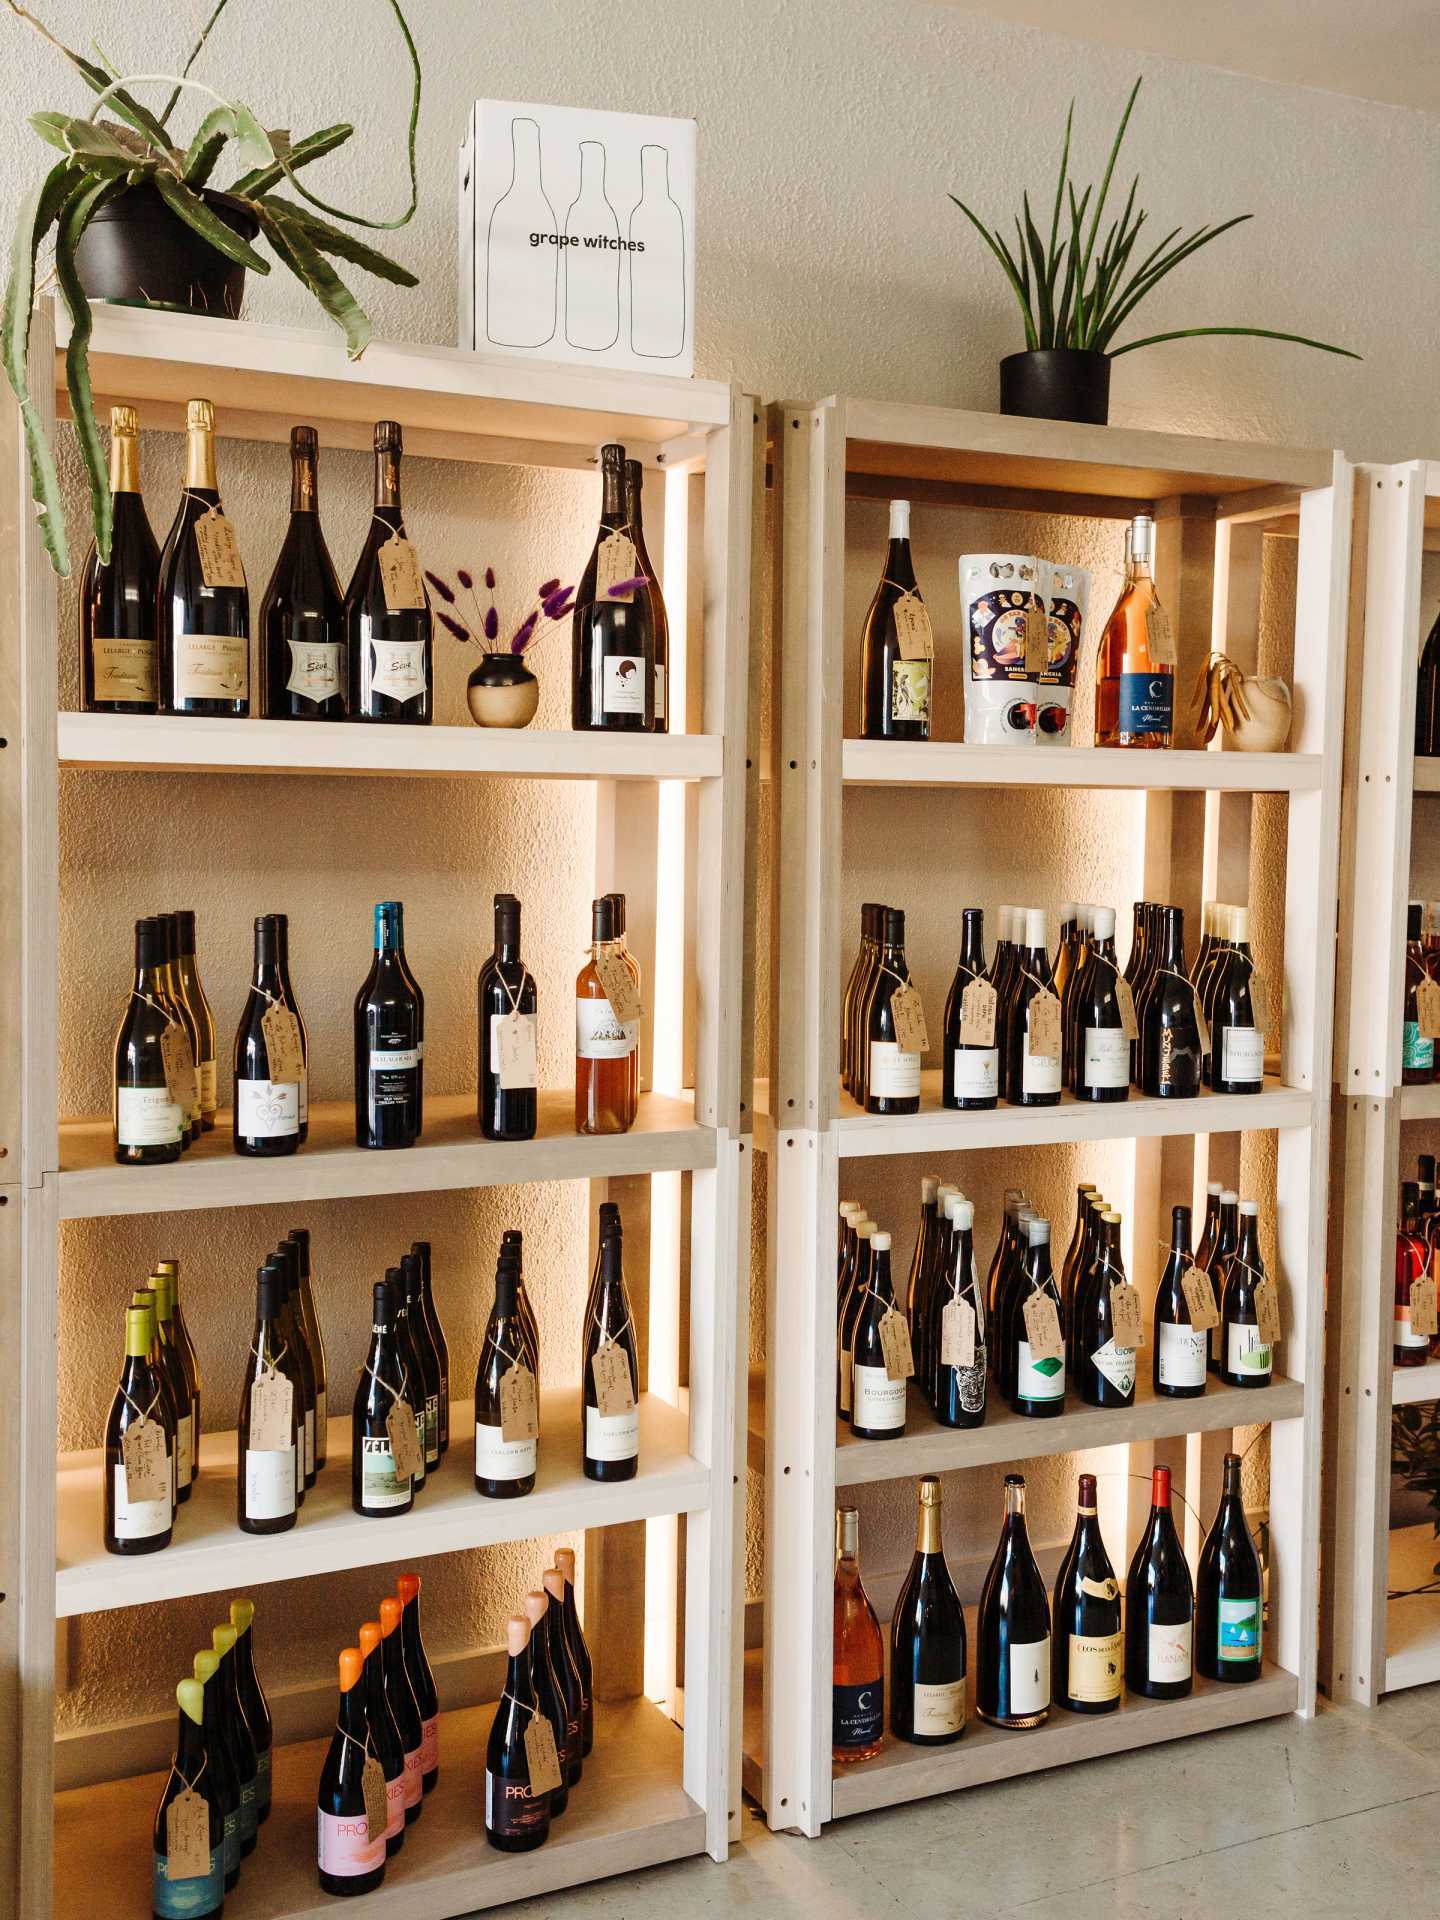 Toronto bottle shops and alcohol stores | Shelves of wine at Grape Witches